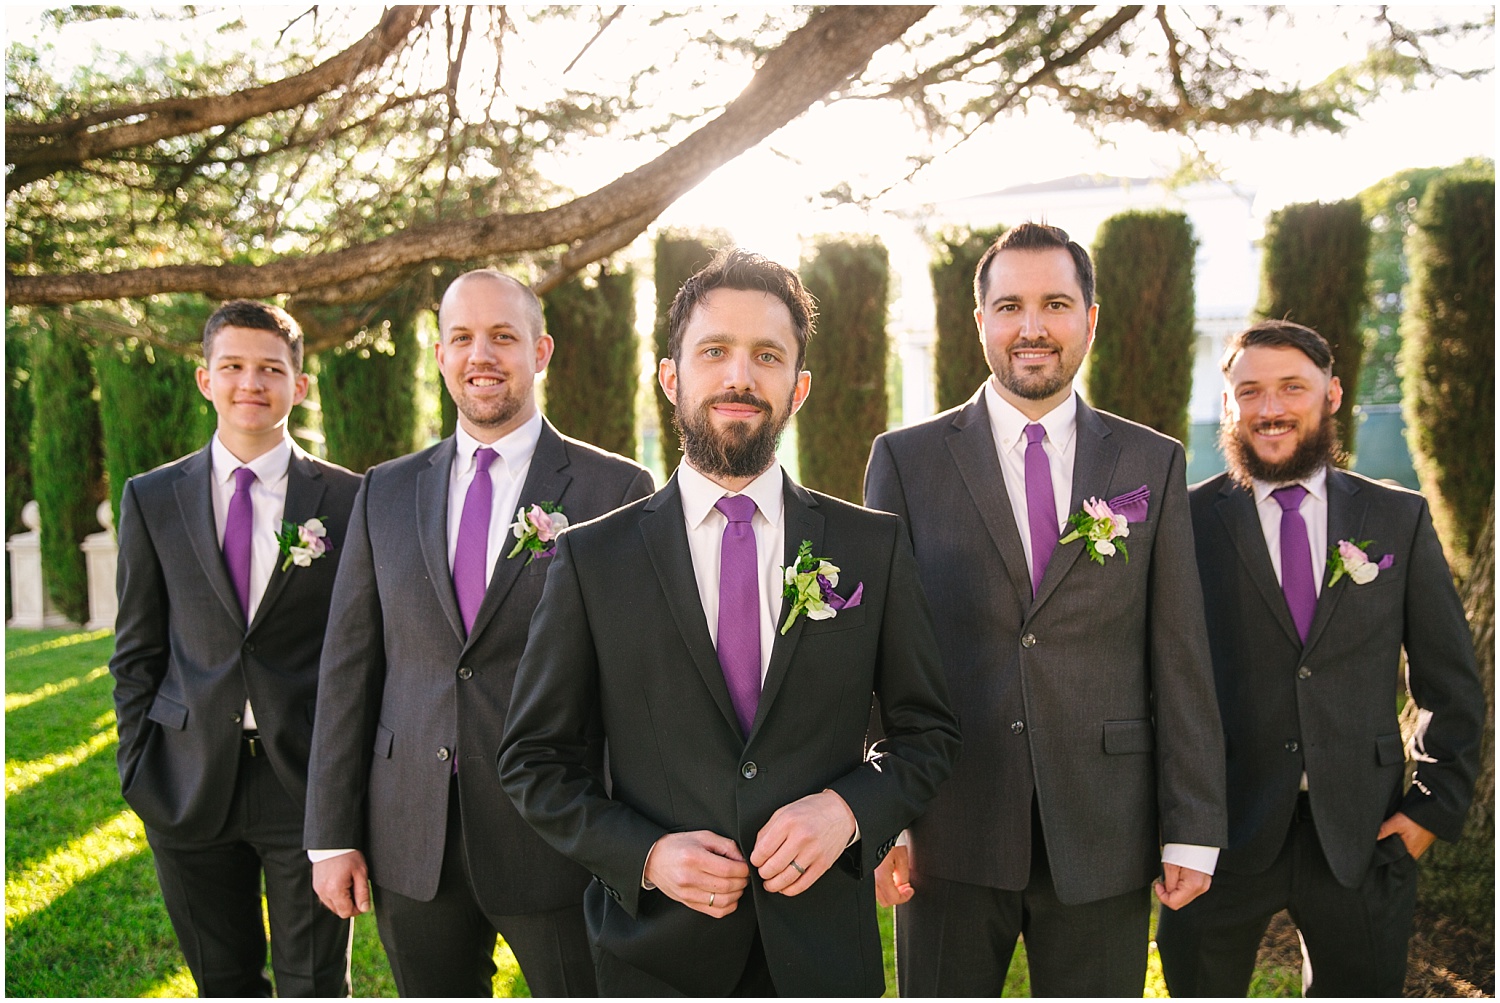 Groom and groomsmen dress in black suits with purple ties at Jefferson Street Mansion wedding